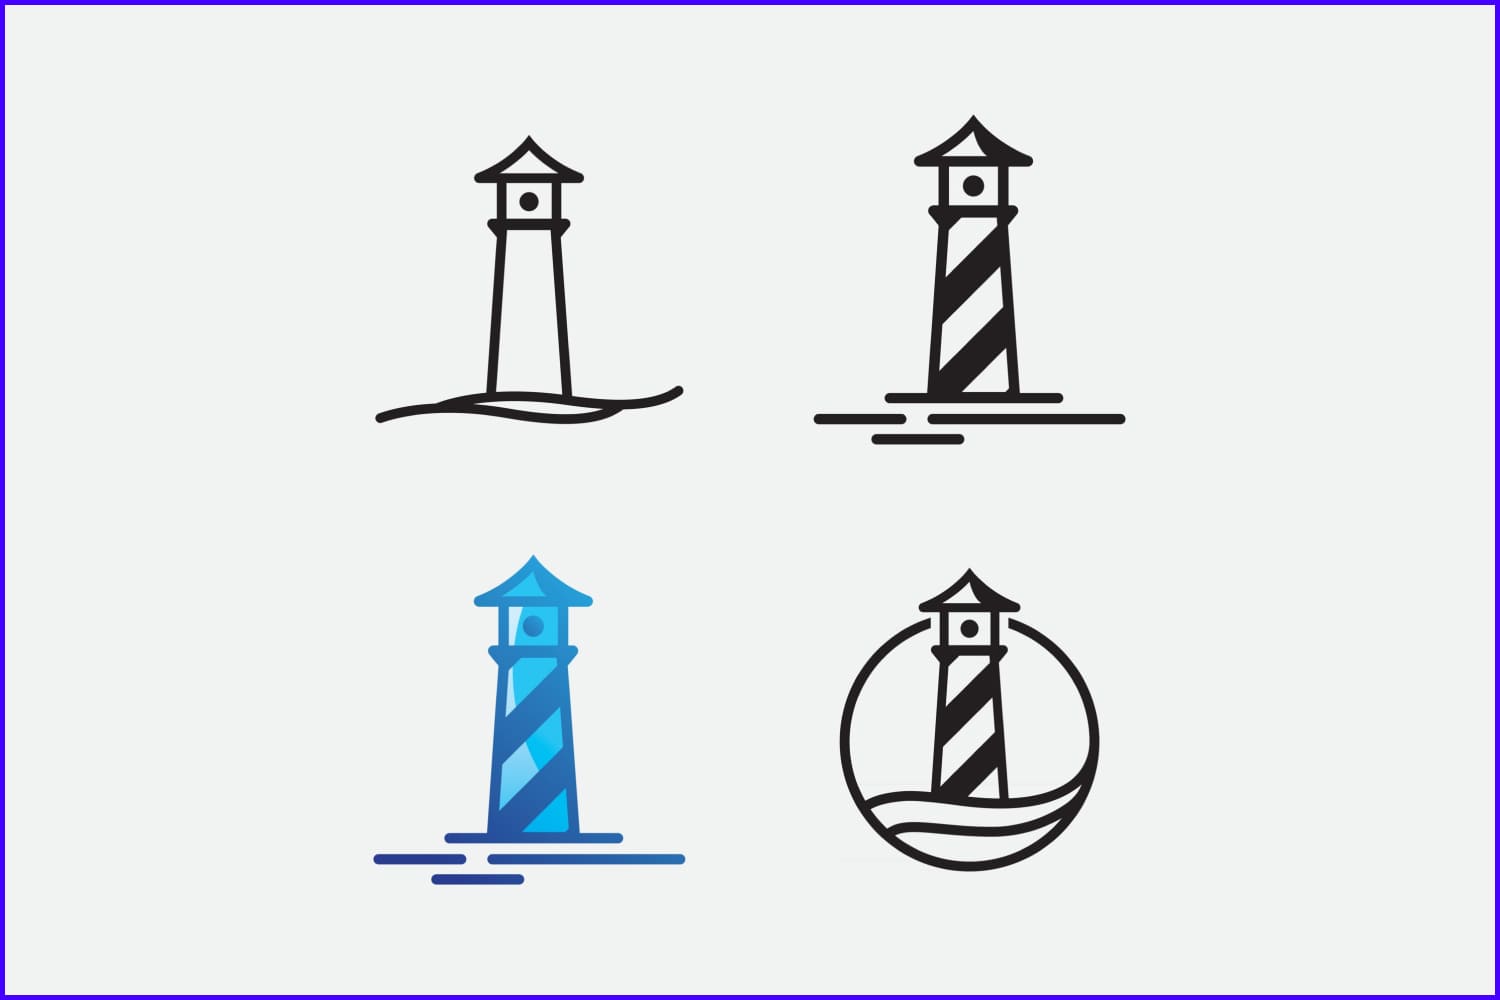 Collage of drawn silhouettes of lighthouses with stripes.